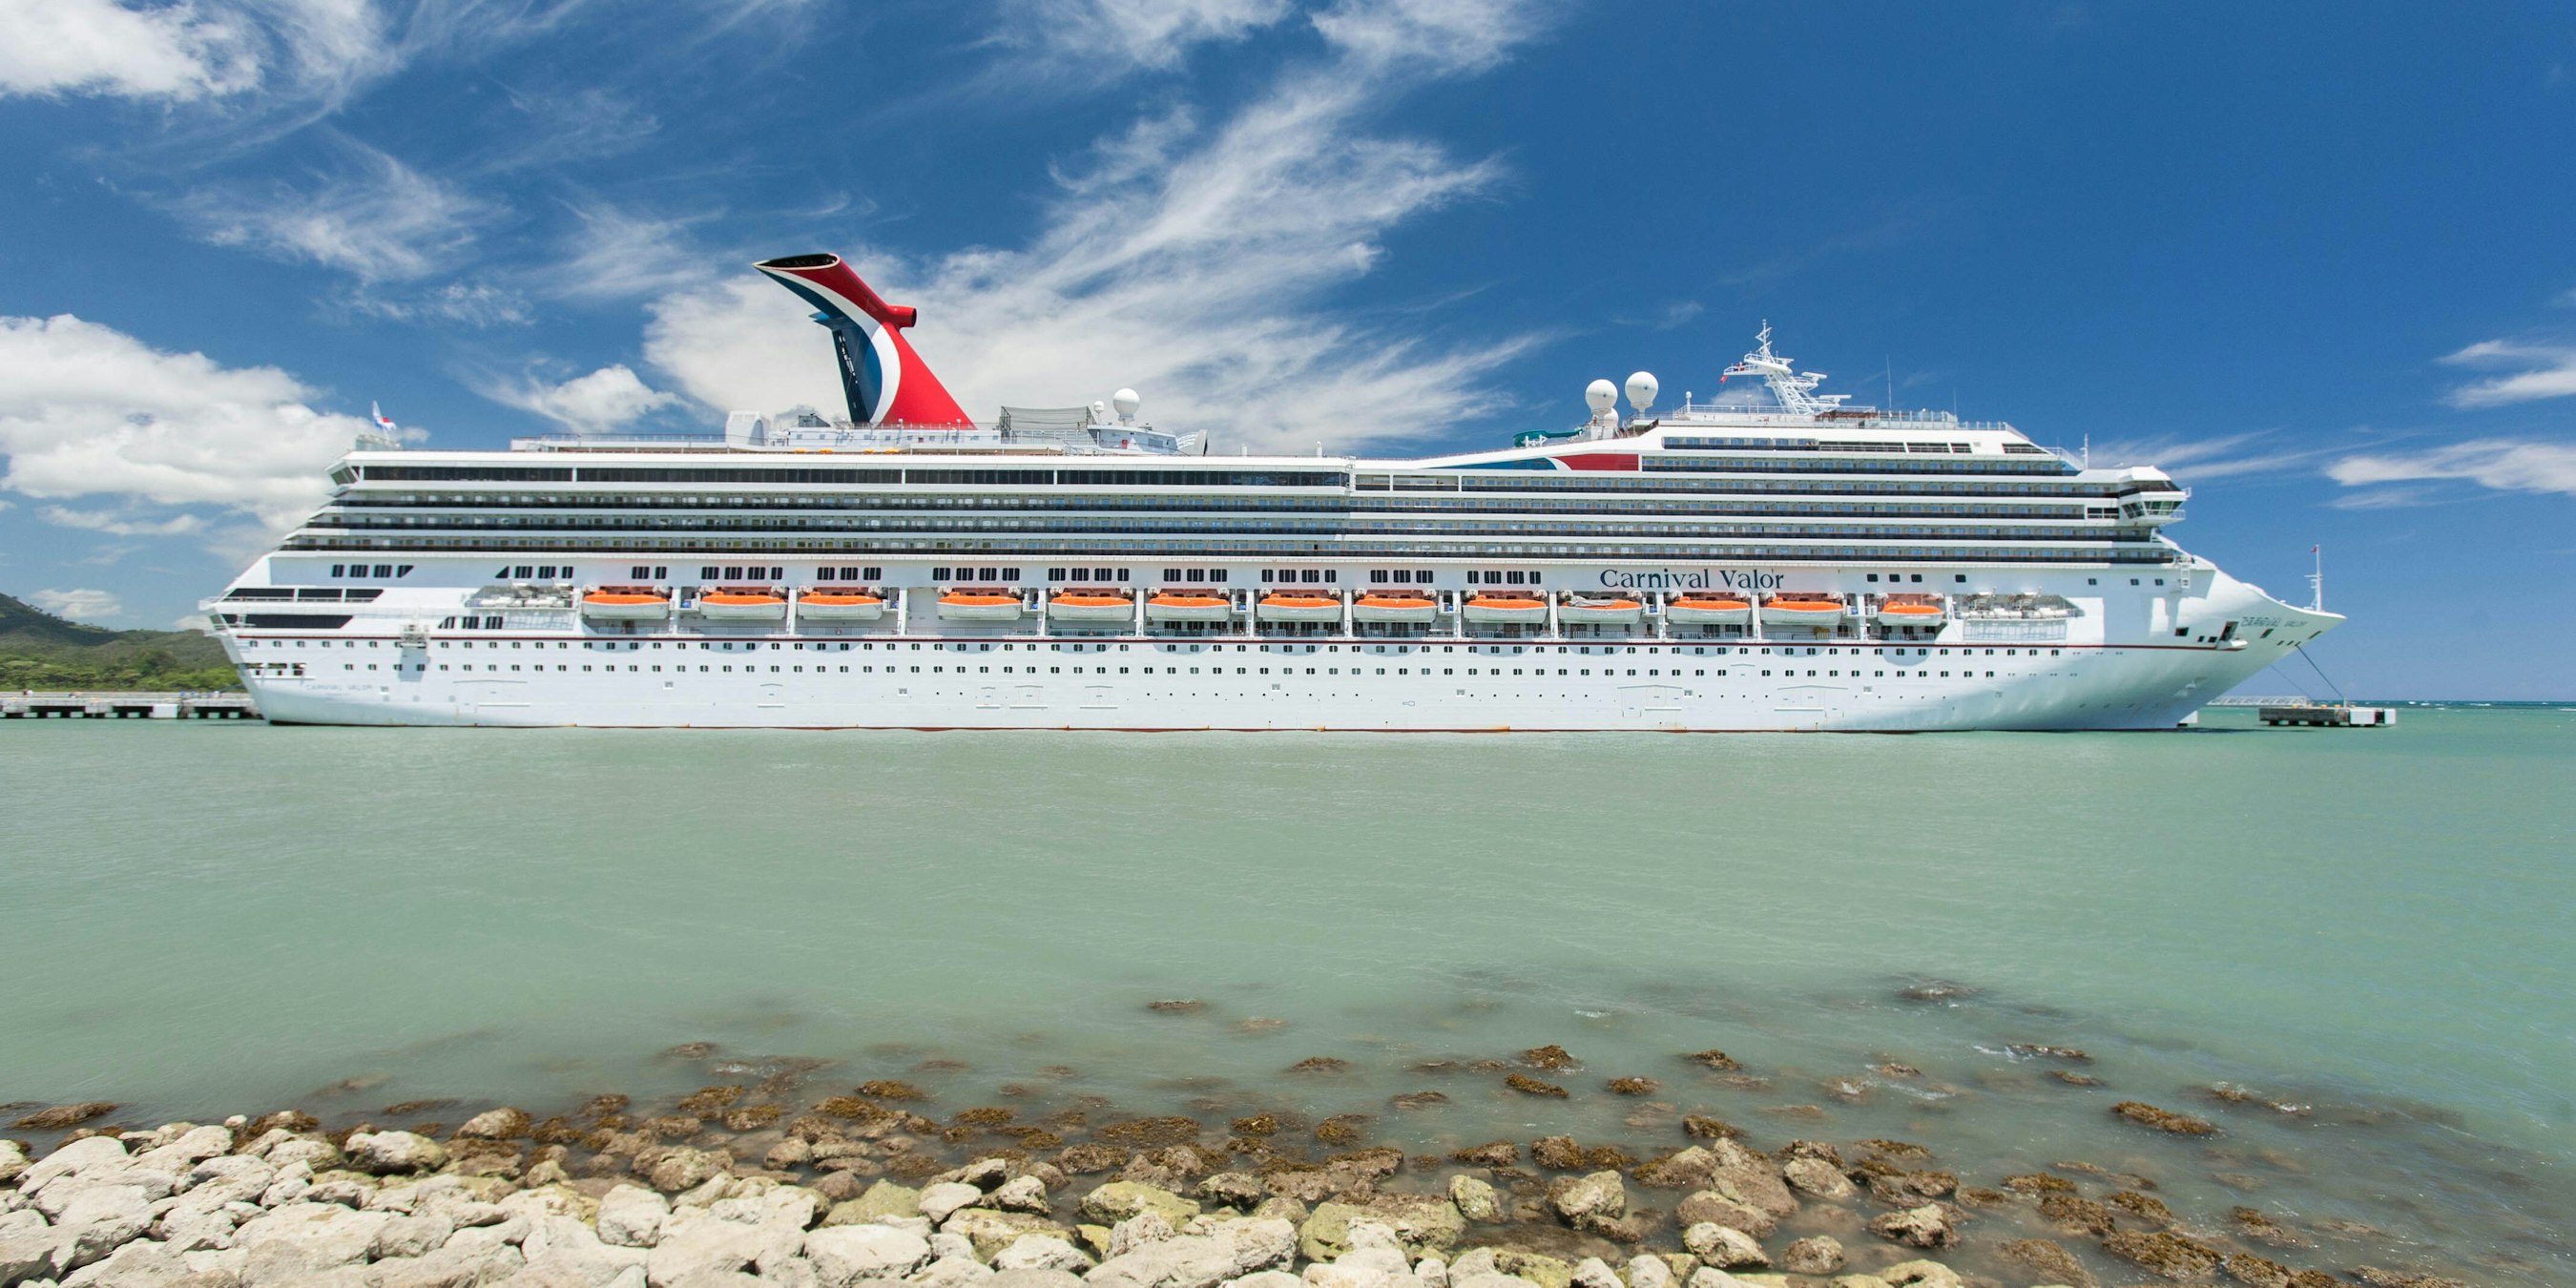 carnival valor 4 day cruise